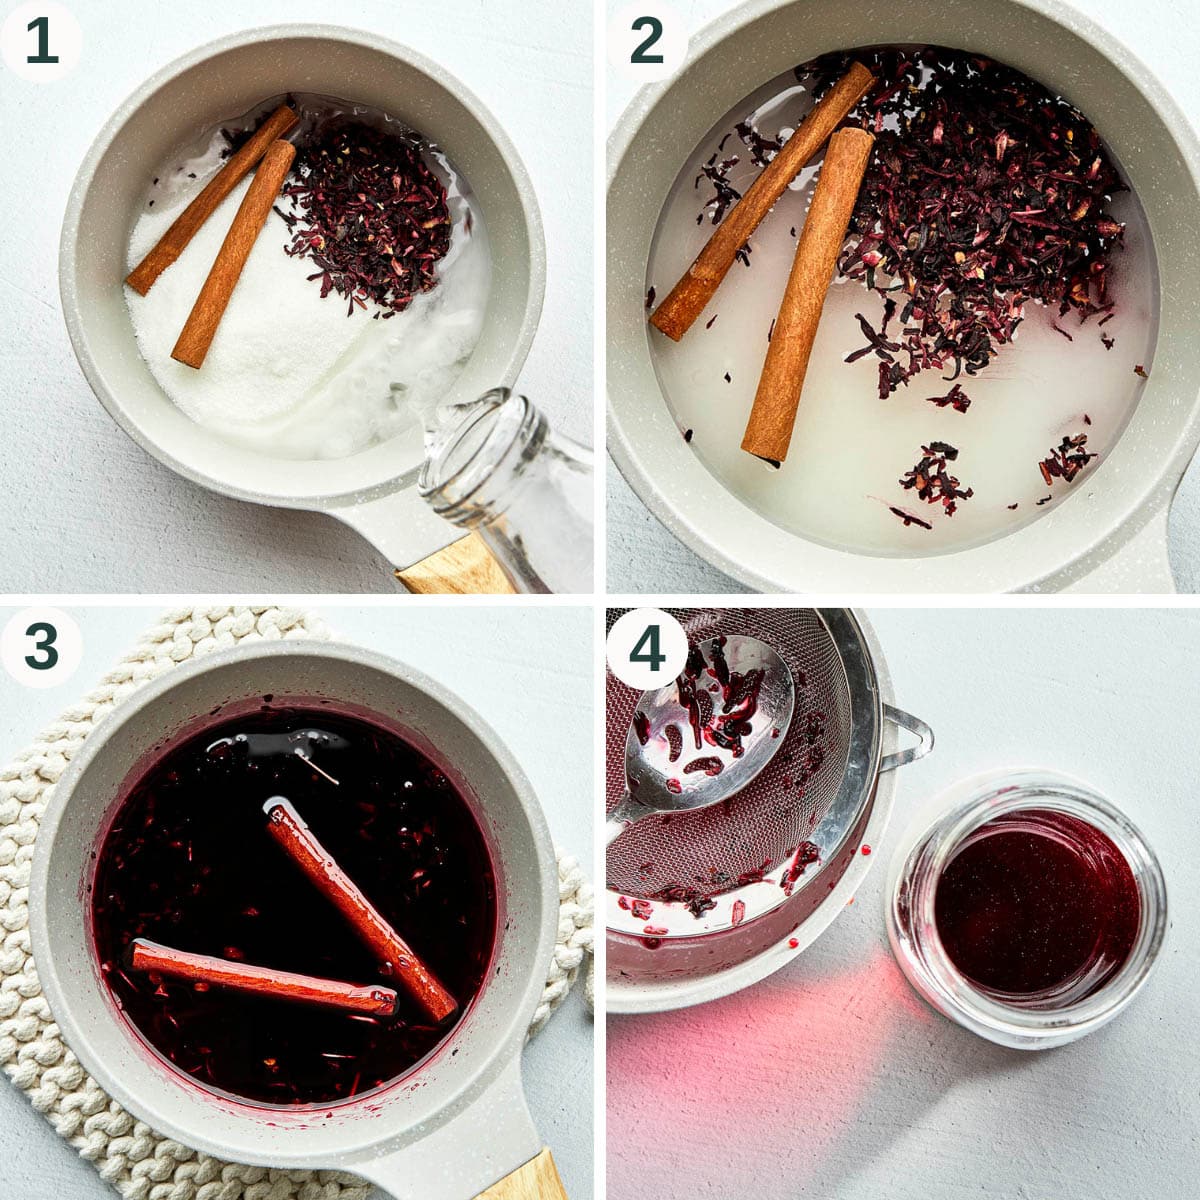 Hibiscus cinnamon syrup steps 1 to 4, adding ingredients and before and after cooking.